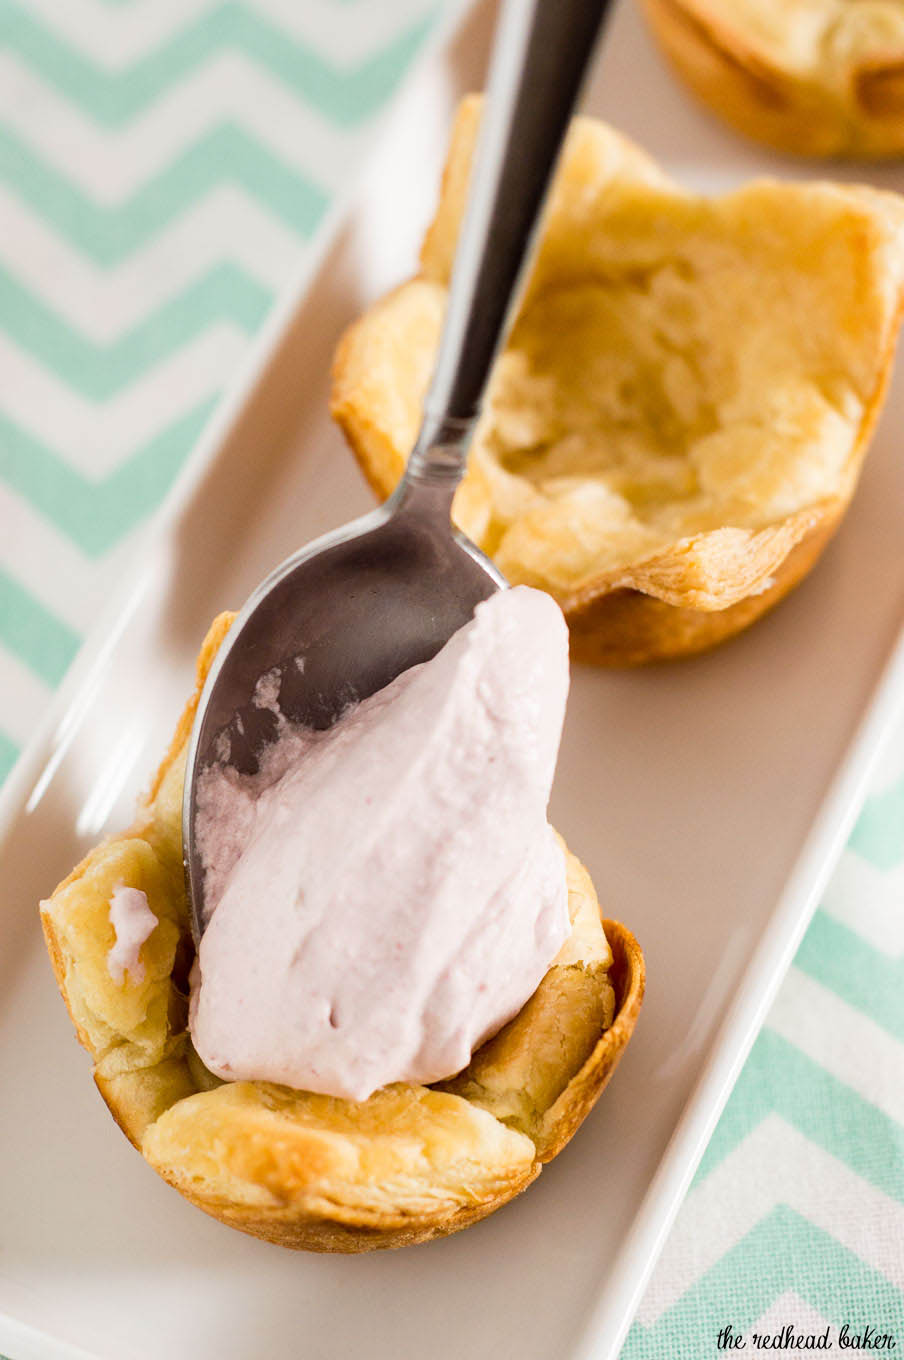 Mini raspberry mousse tartlets are full of spring flavor! Raspberry curd gives them a spring pink tint, and they are finished with a dollop of Reddi-wip®! #SpringReddi #ad